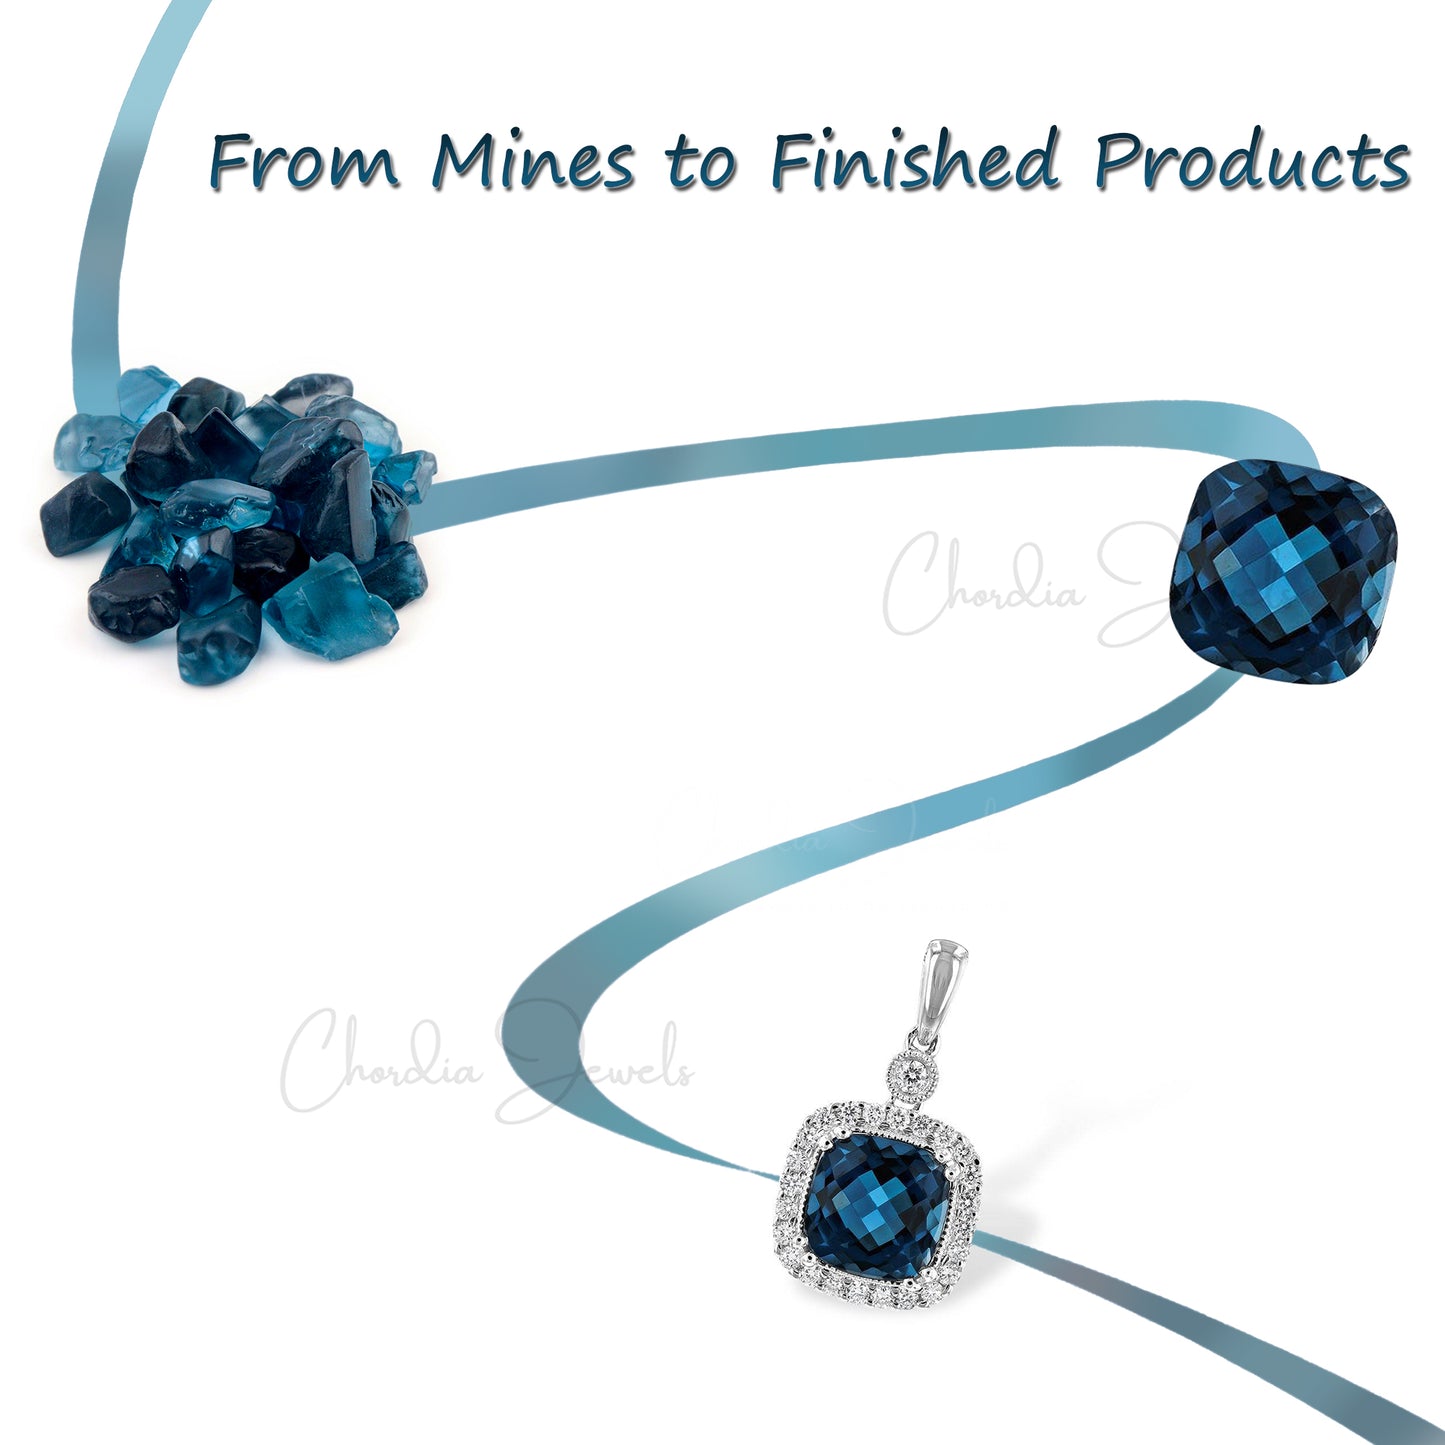 925 Sterling Silver London Blue Topaz Dangle Earrings For Women From Top Wholesaler At Offer Price